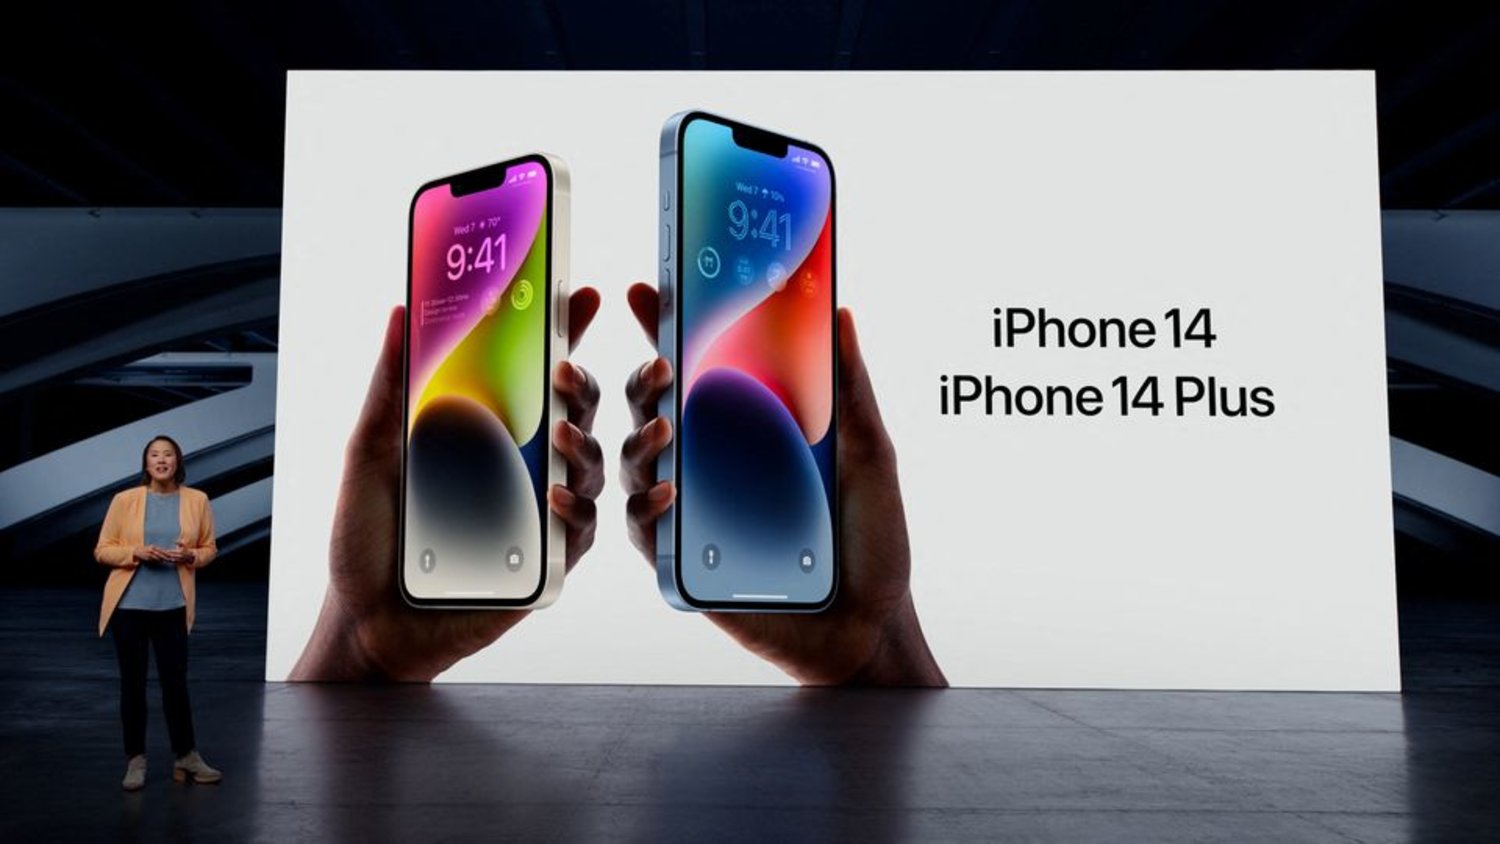 Apple's vice president of Worldwide Product Marketing Kaiann Drance talks about the new iPhone 14 and iPhone 14 Plus for a special event at Apple Park in Cupertino, California, US in a still image from keynote video released September 7, 2022. Apple Inc./Handout via REUTERS